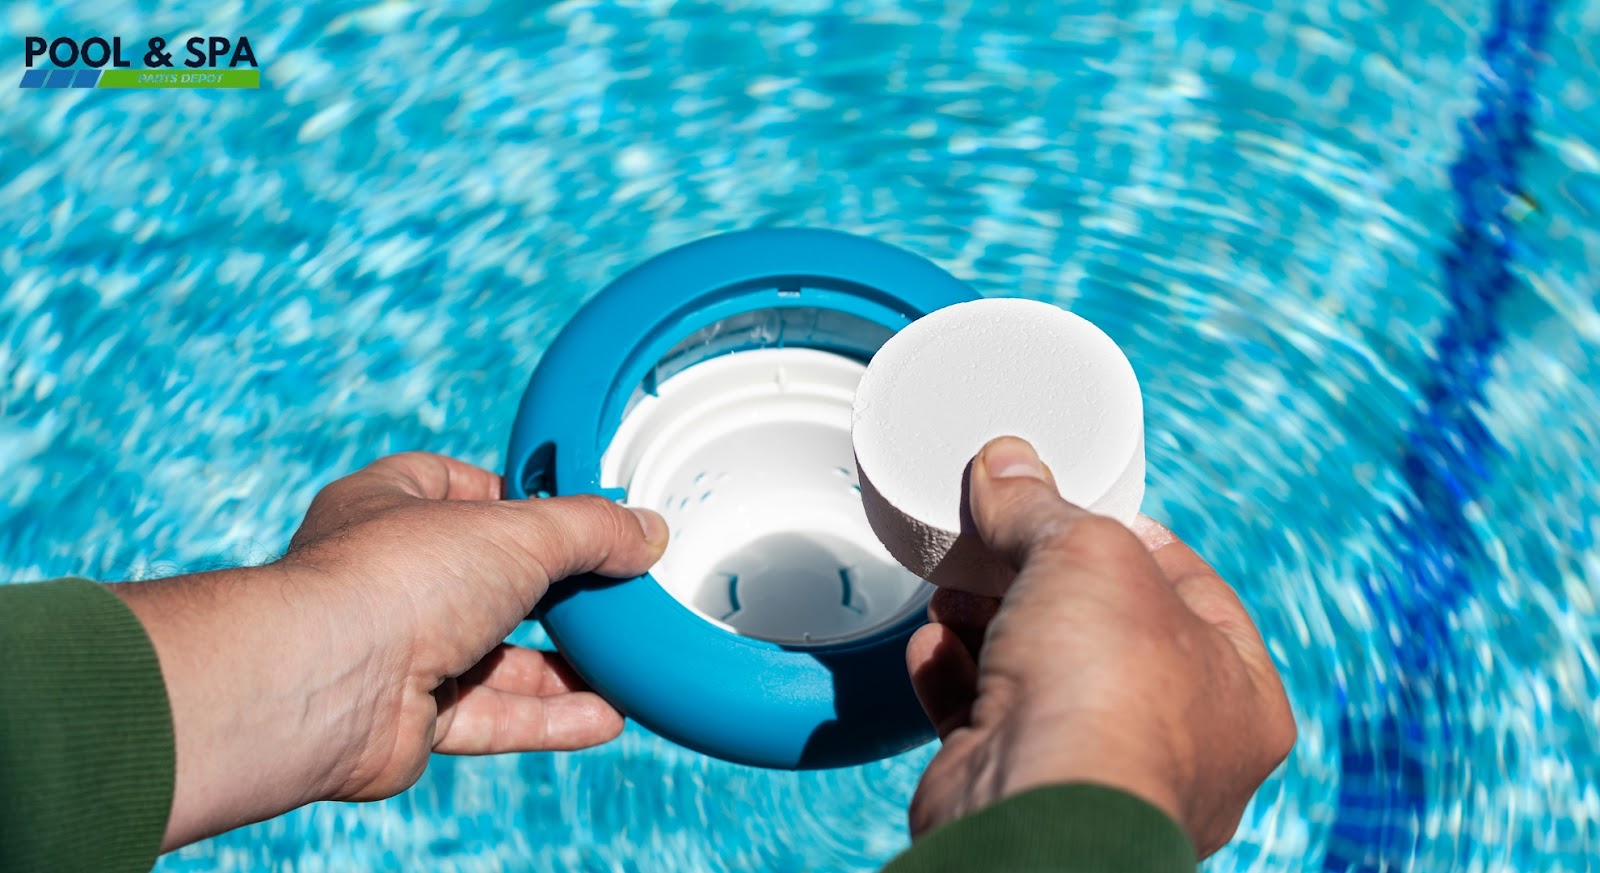 Chlorine: The Pool's Protector